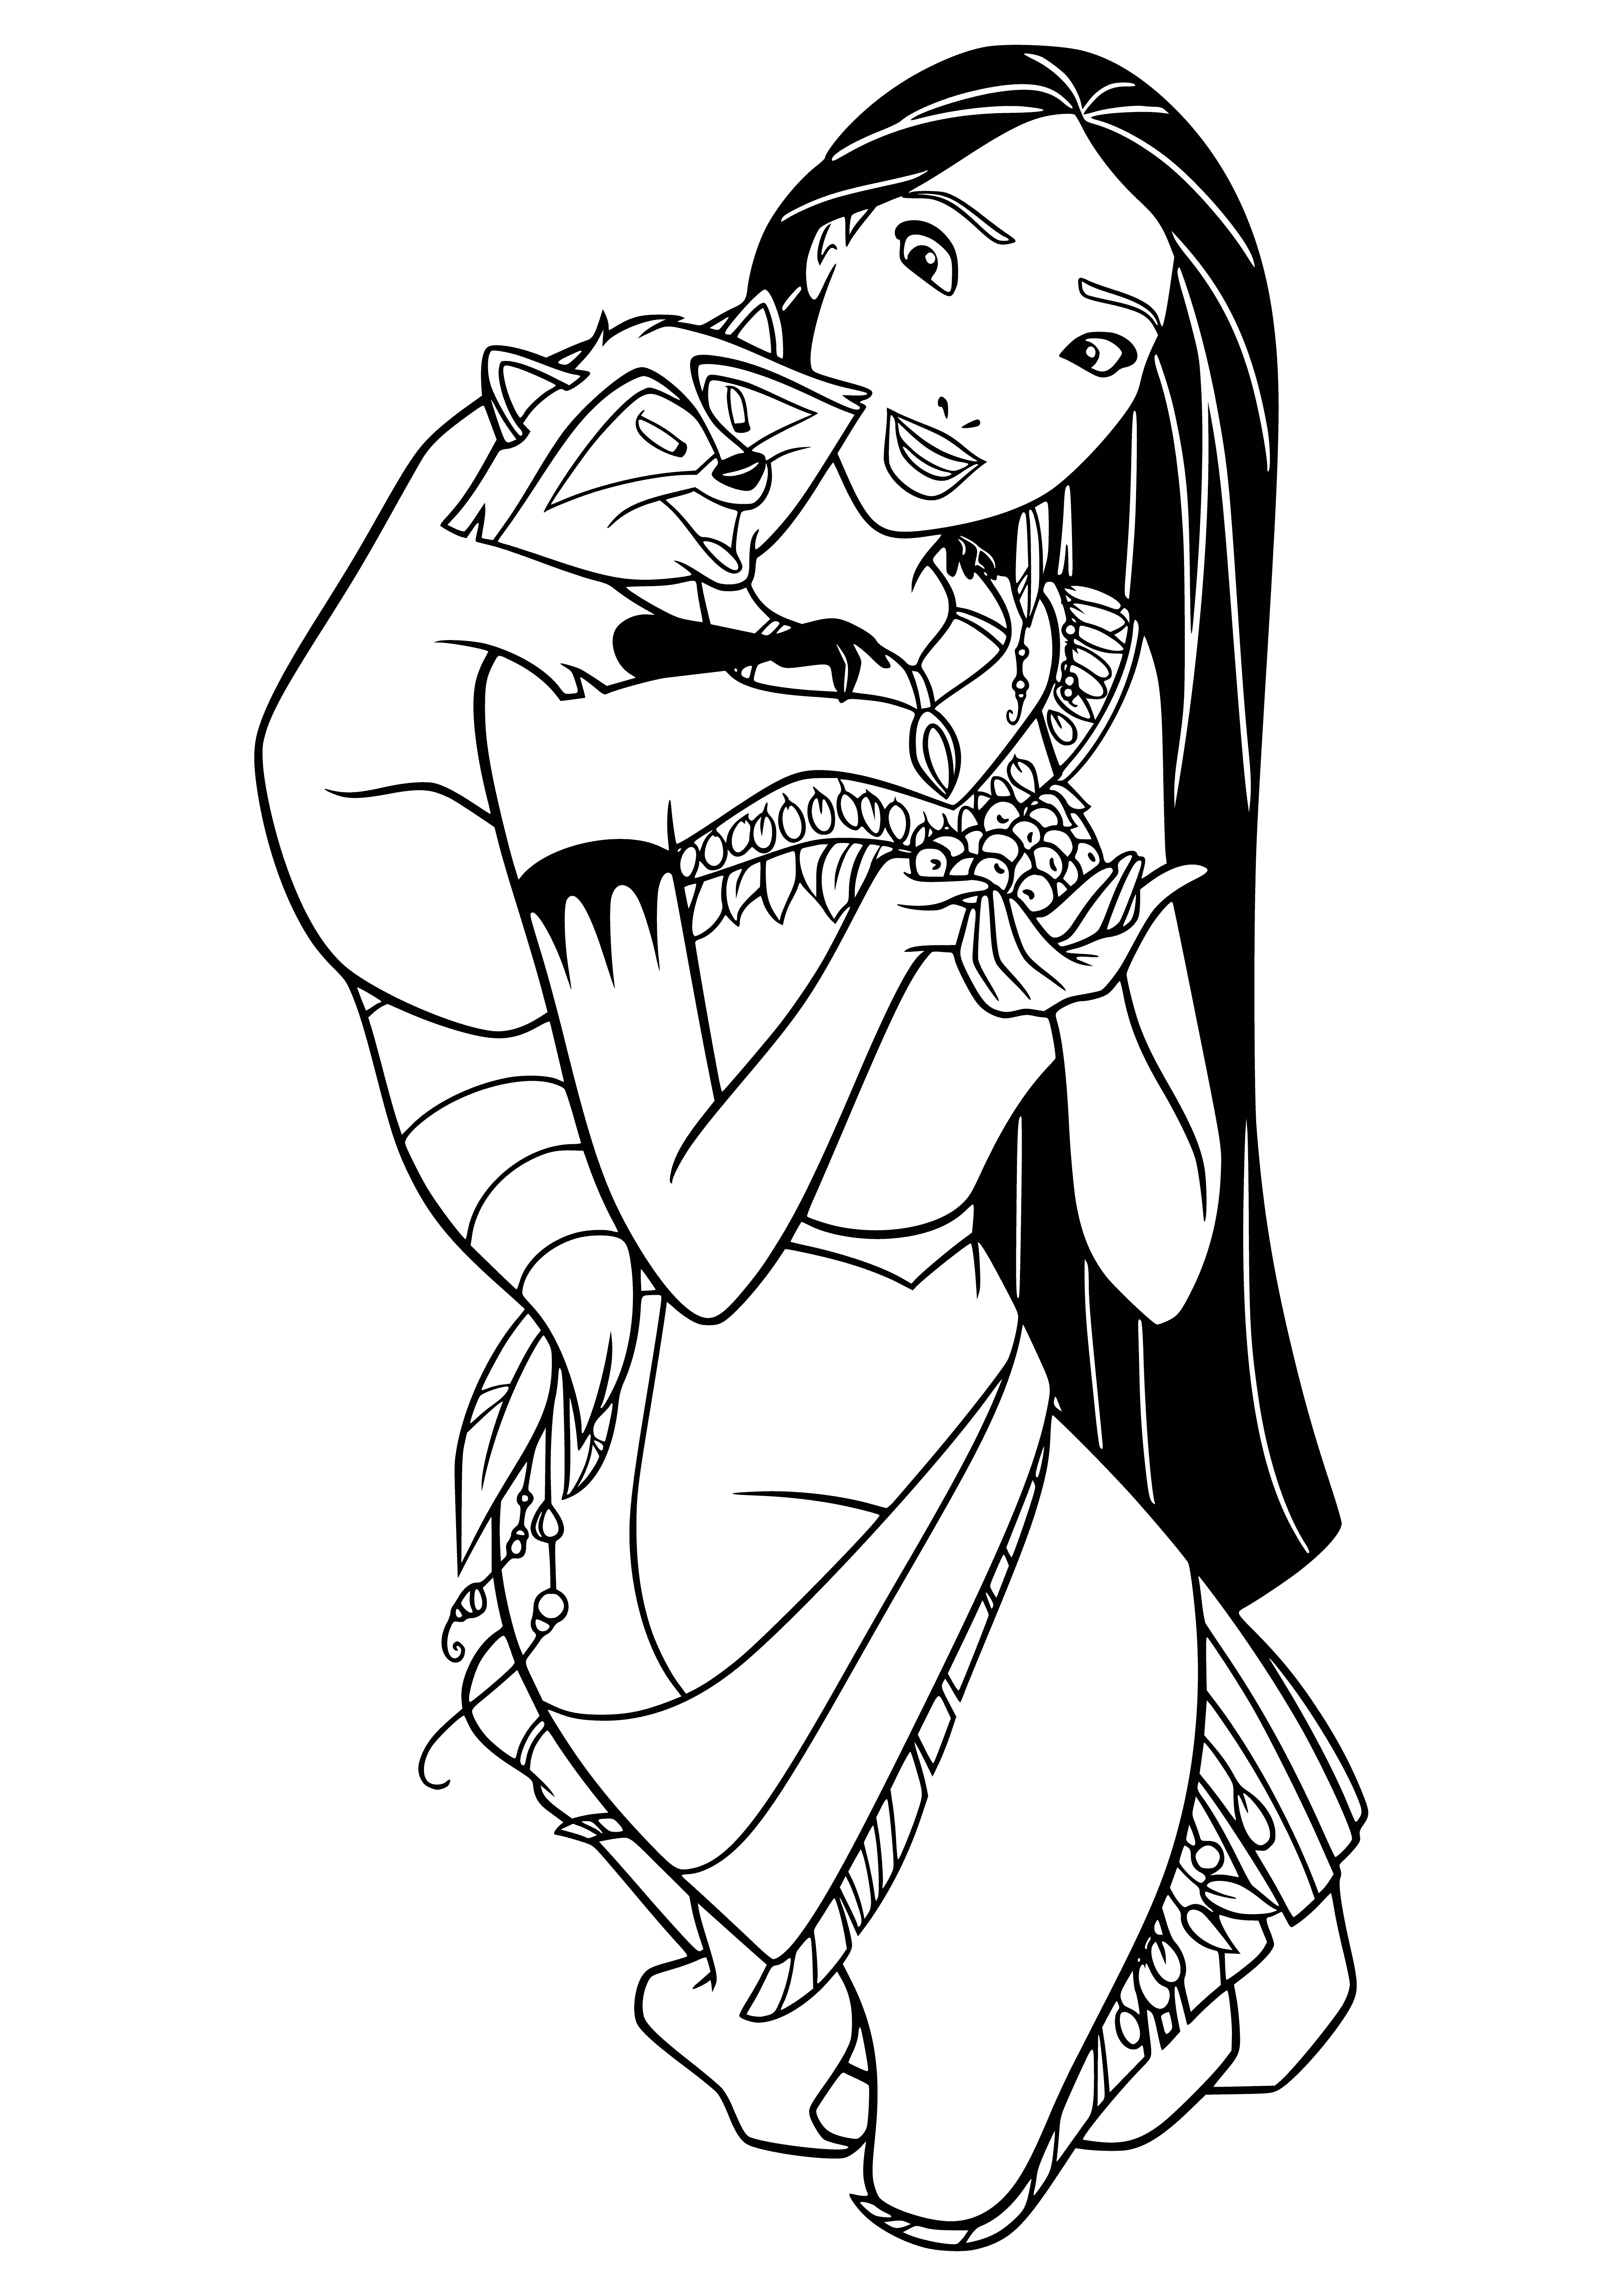 Pocahontas and unit Miko coloring page